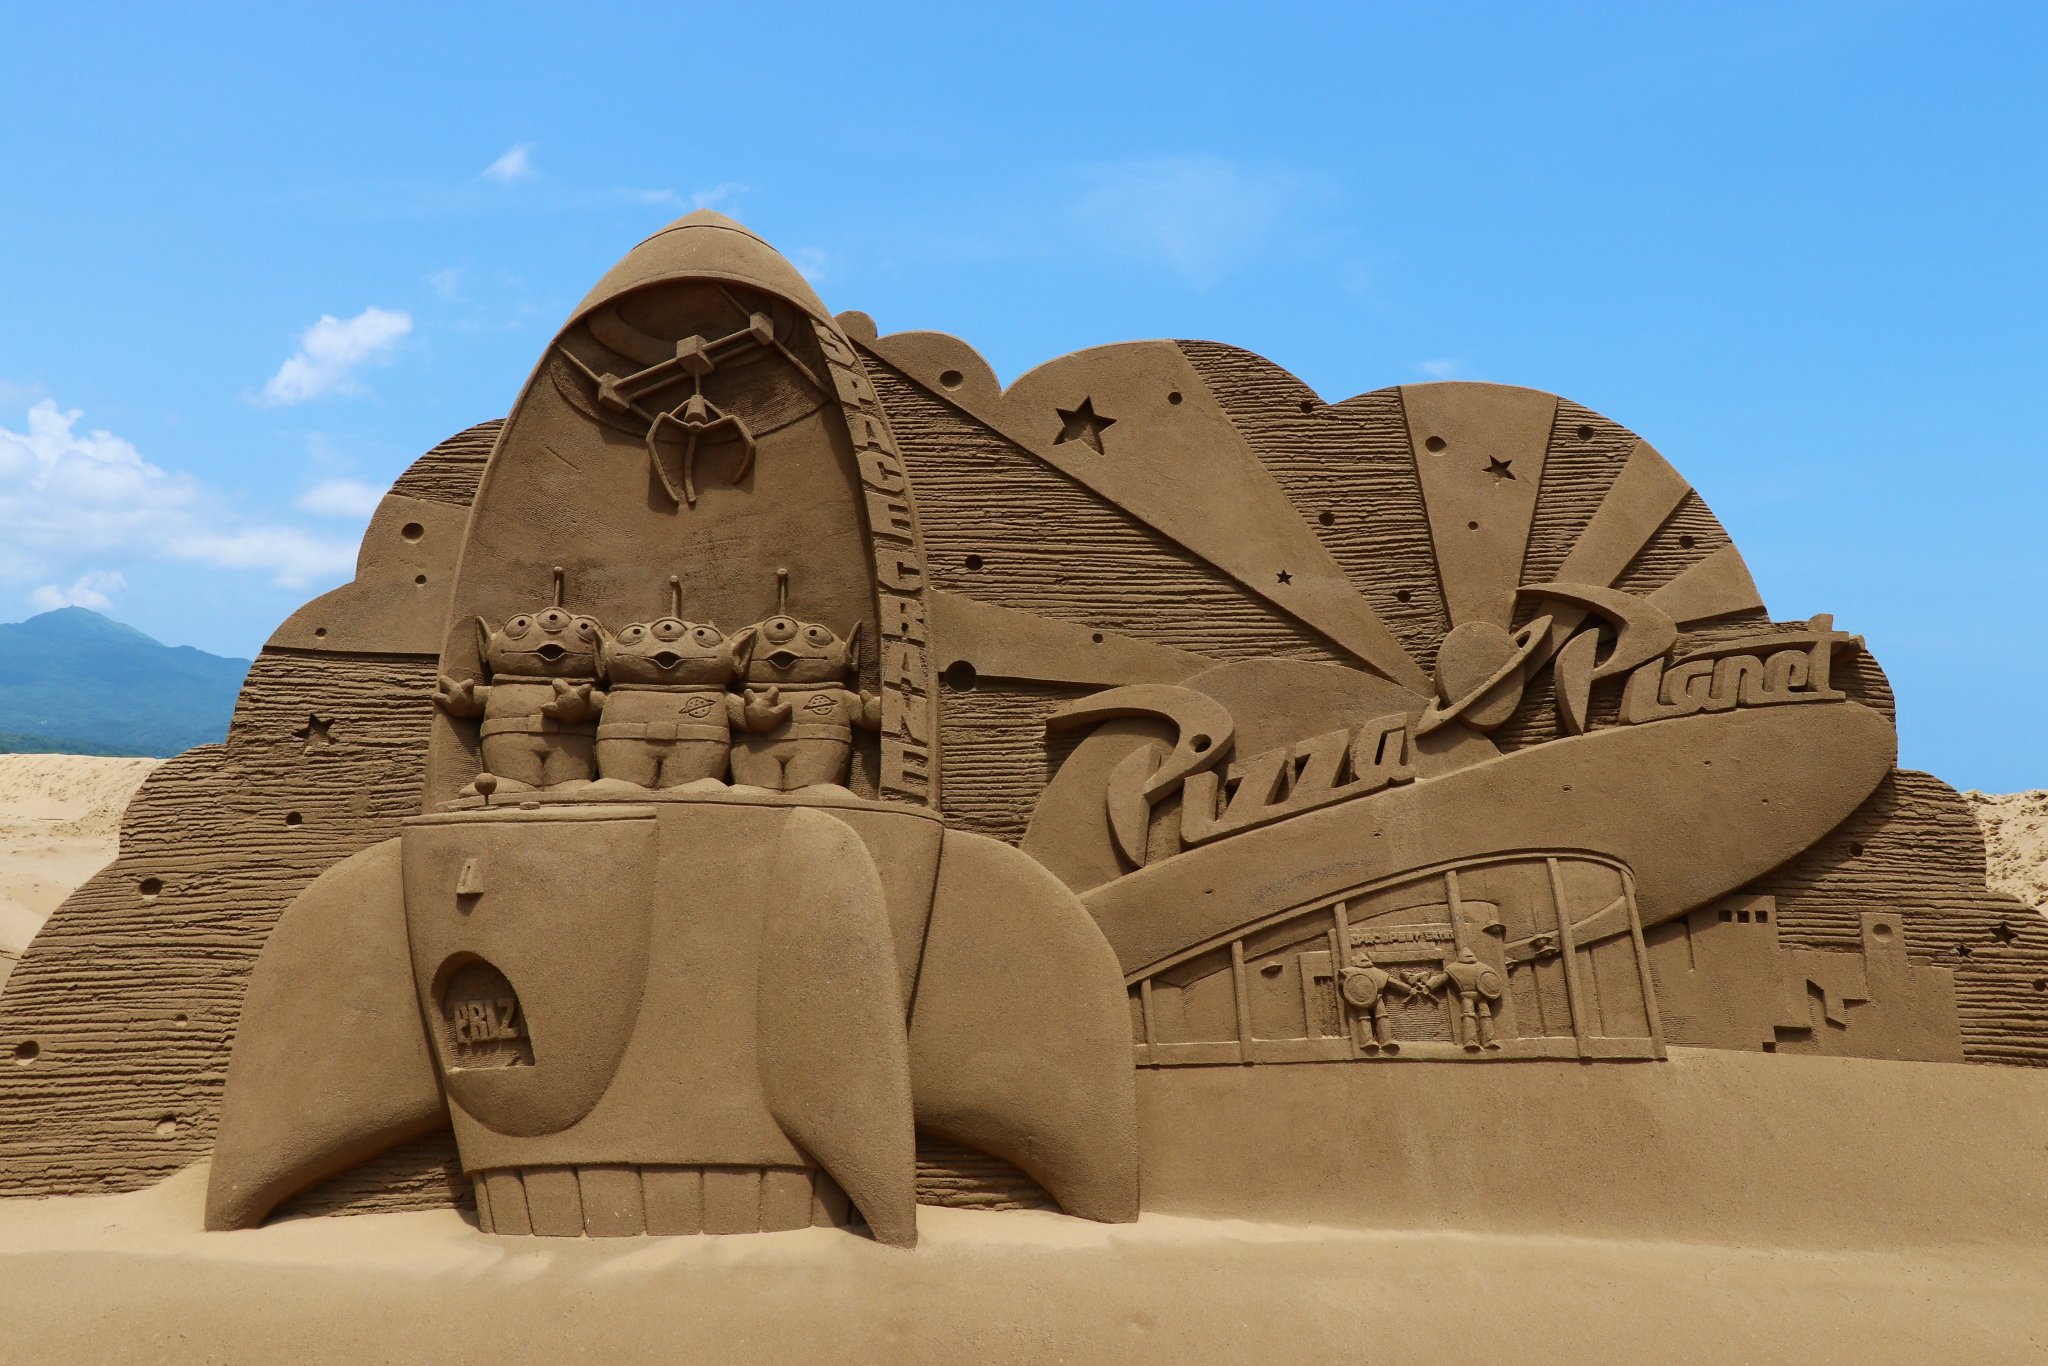 Pixar on X: OoOooh! Out-of-this-world sand art! 15 artists around the  world created 16 Pixar-themed sand sculptures for this year's Fulong Sand  Art Festival in Taiwan to celebrate #Disney100! See them all! (1/4)   /